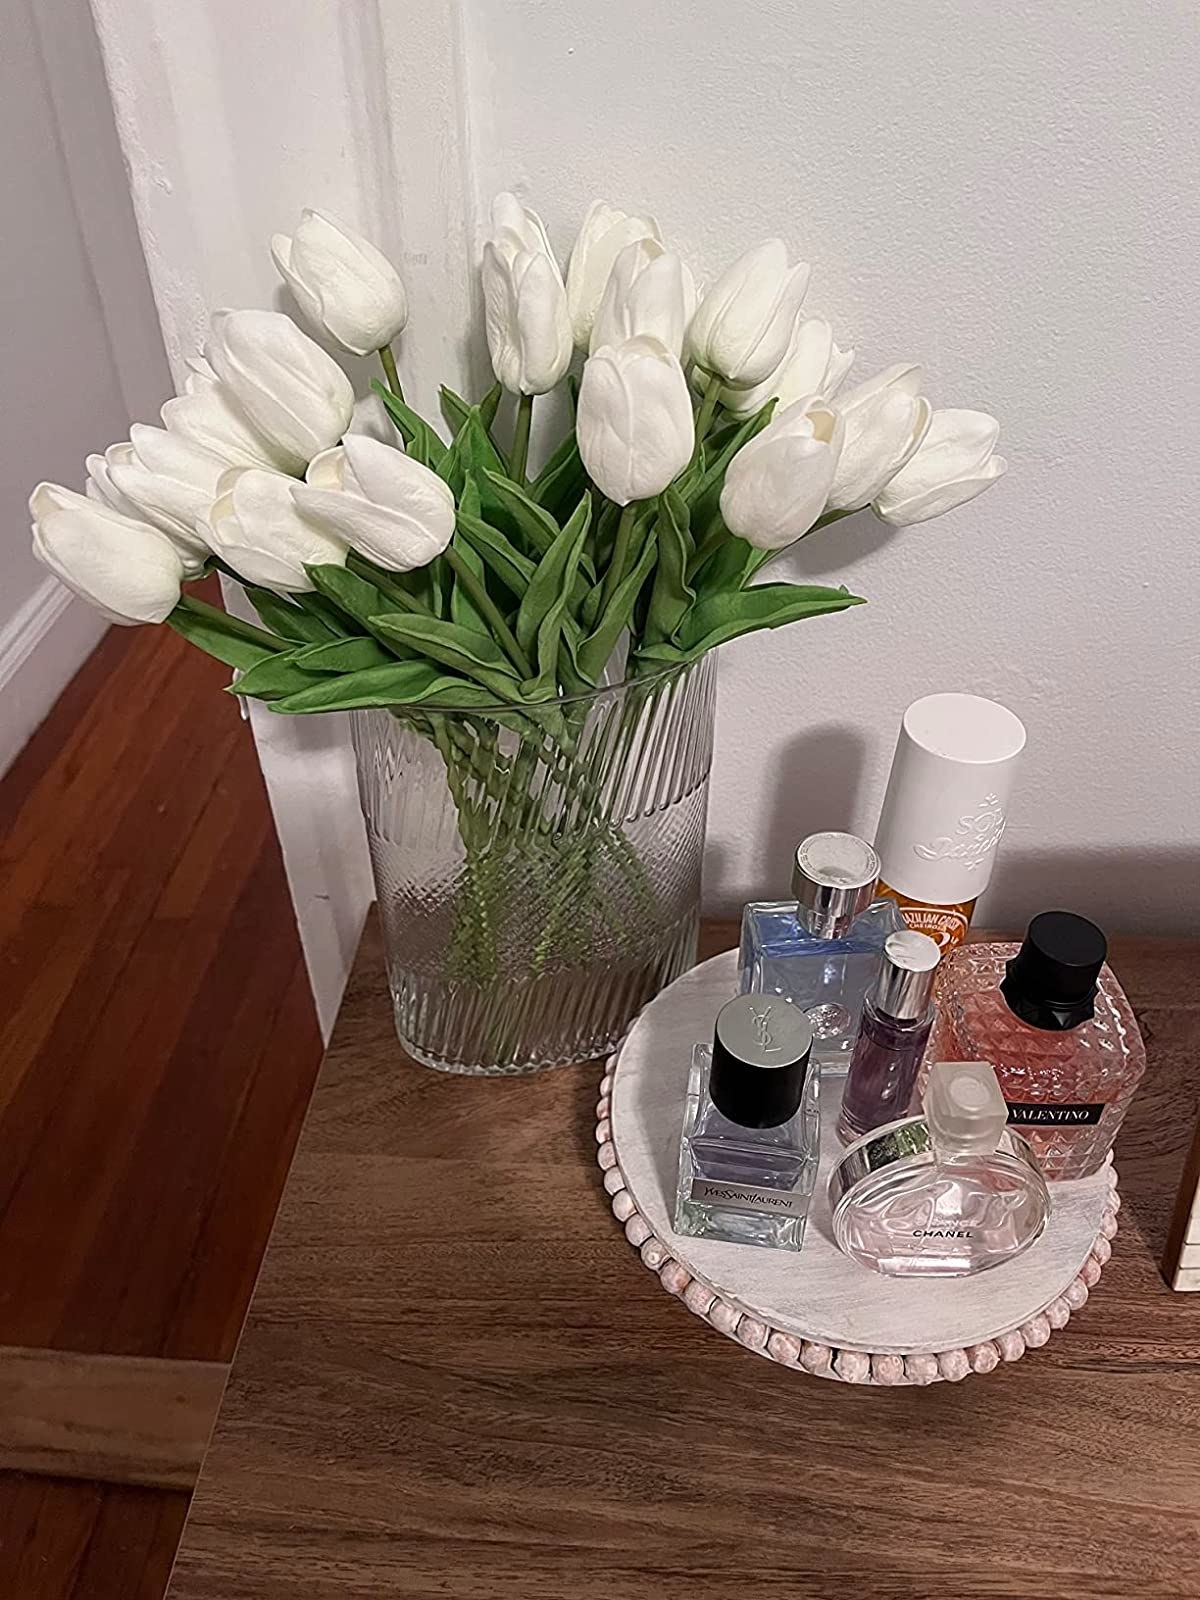 Reviewer image of white tulips in a vase next to a tray holding perfumes